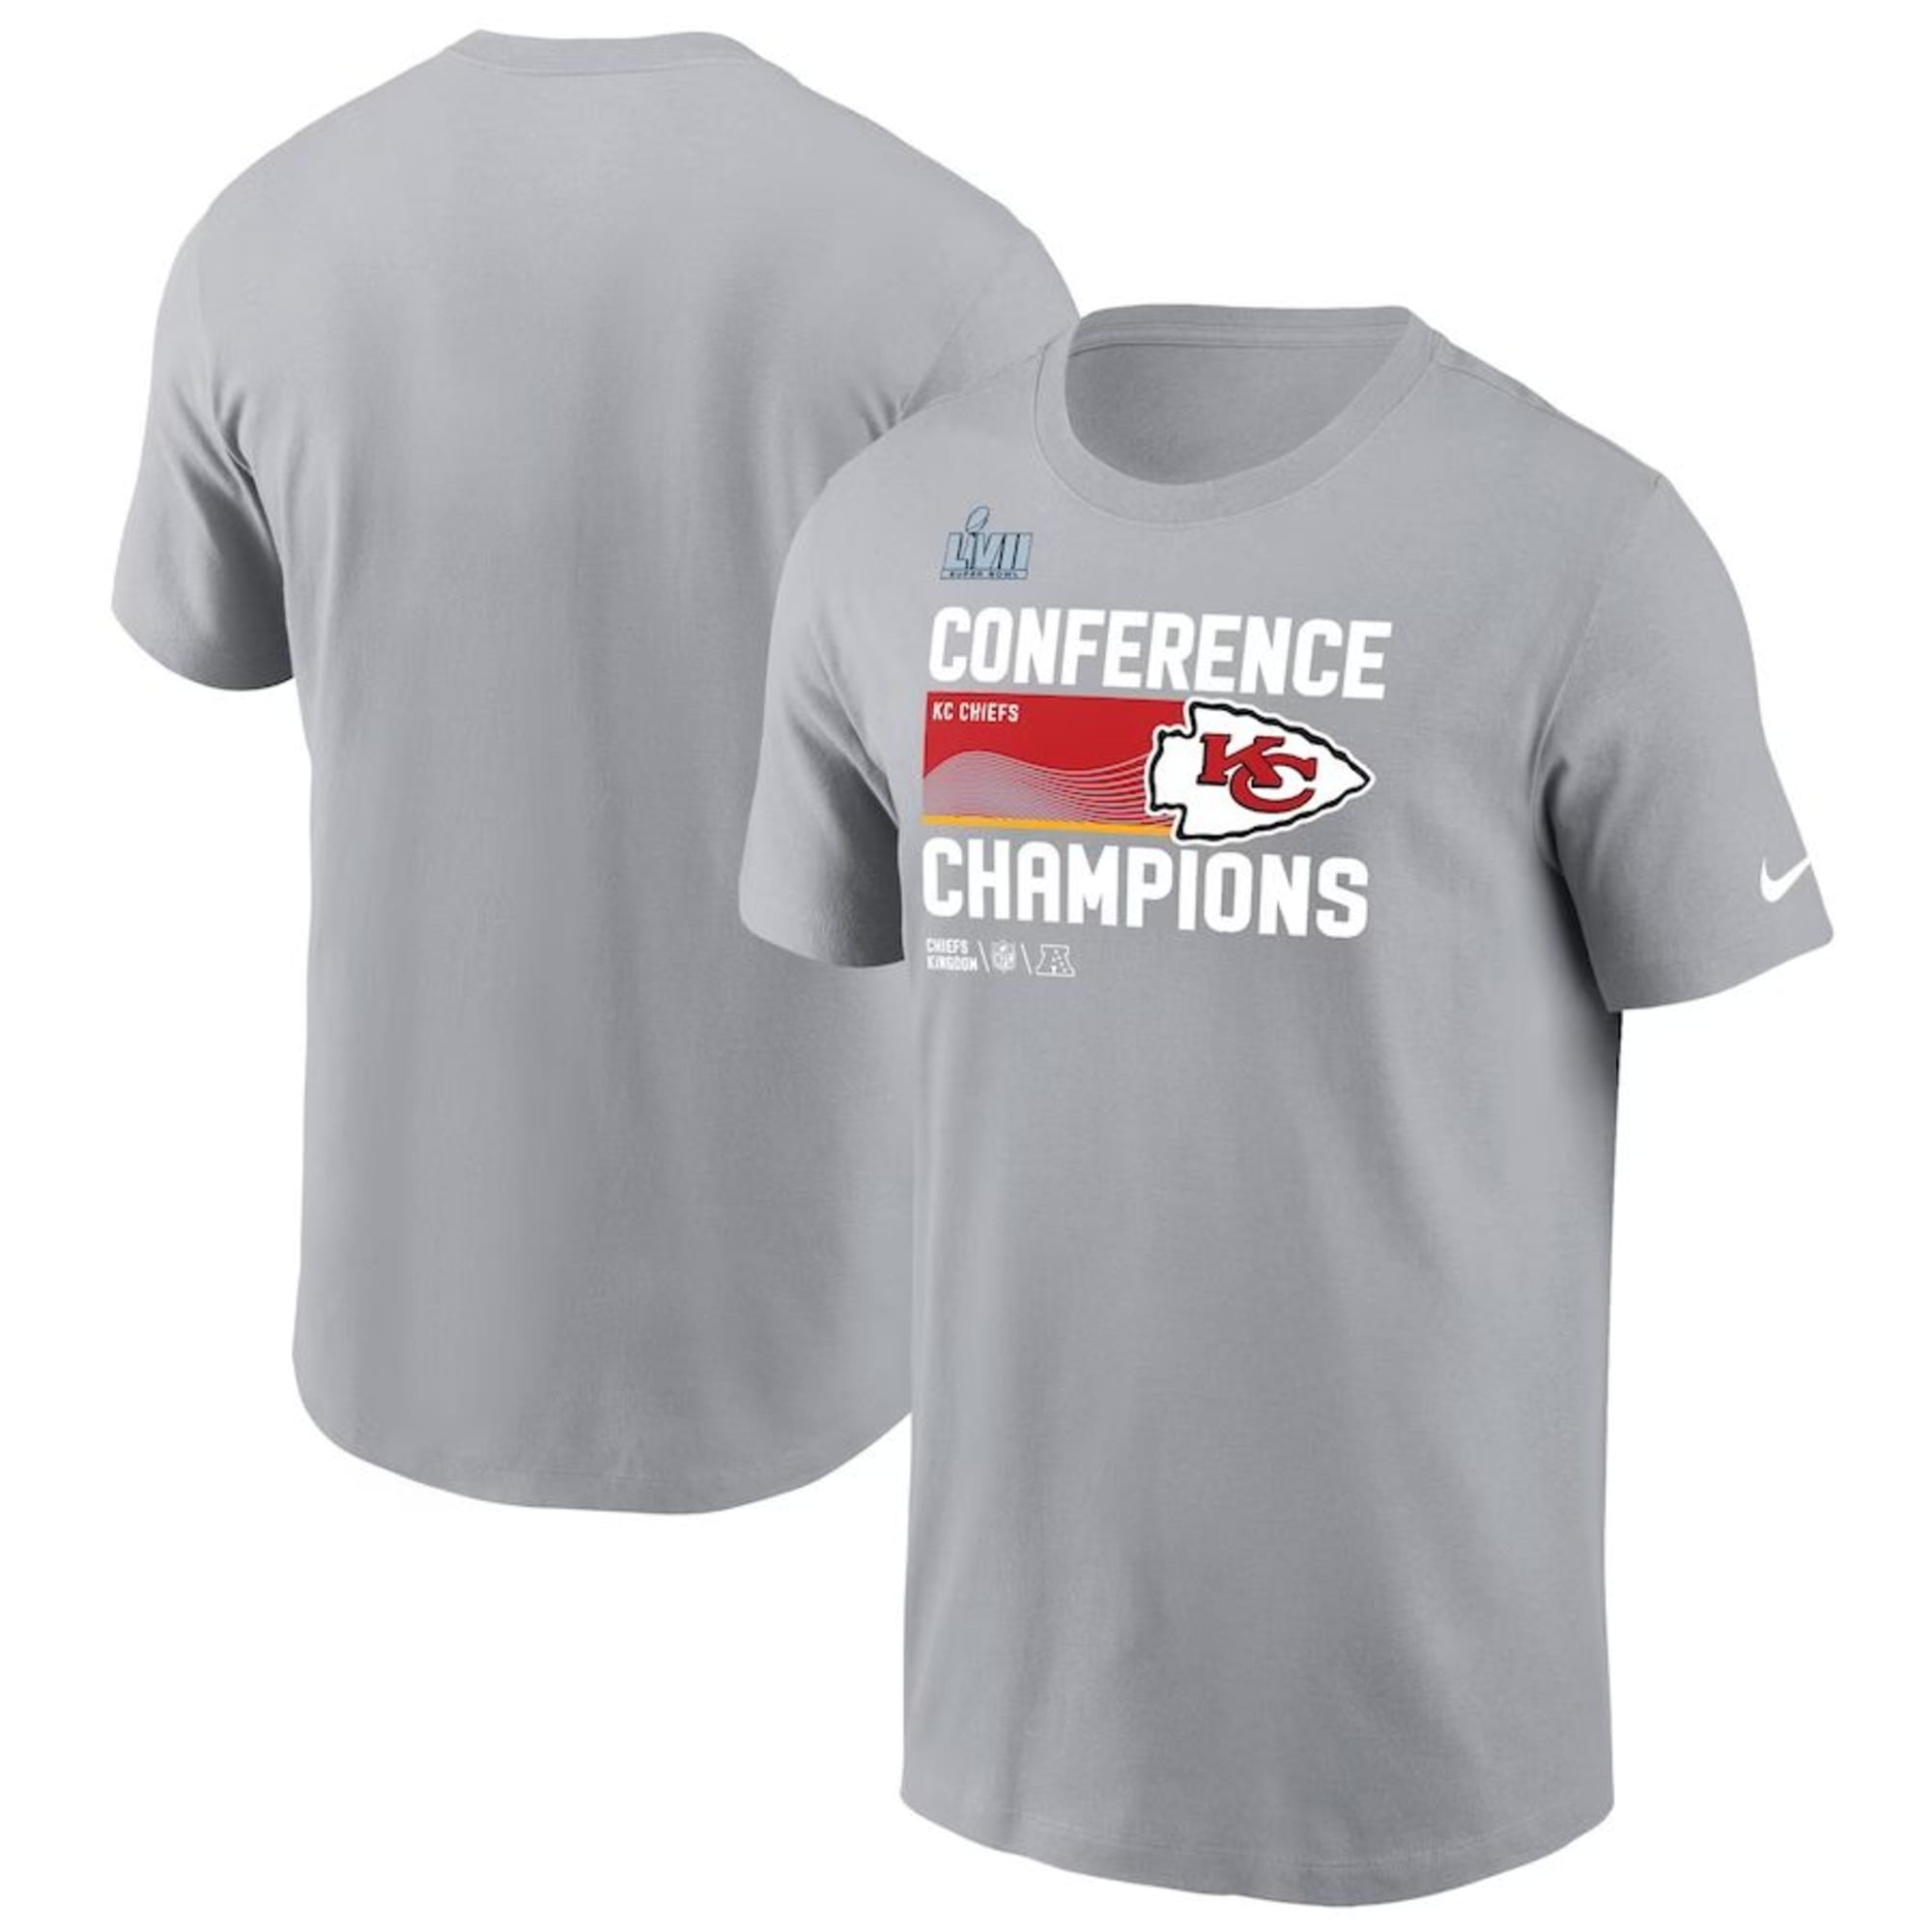 Order your Kansas City Chiefs AFC Champions shirts and memorabilia now